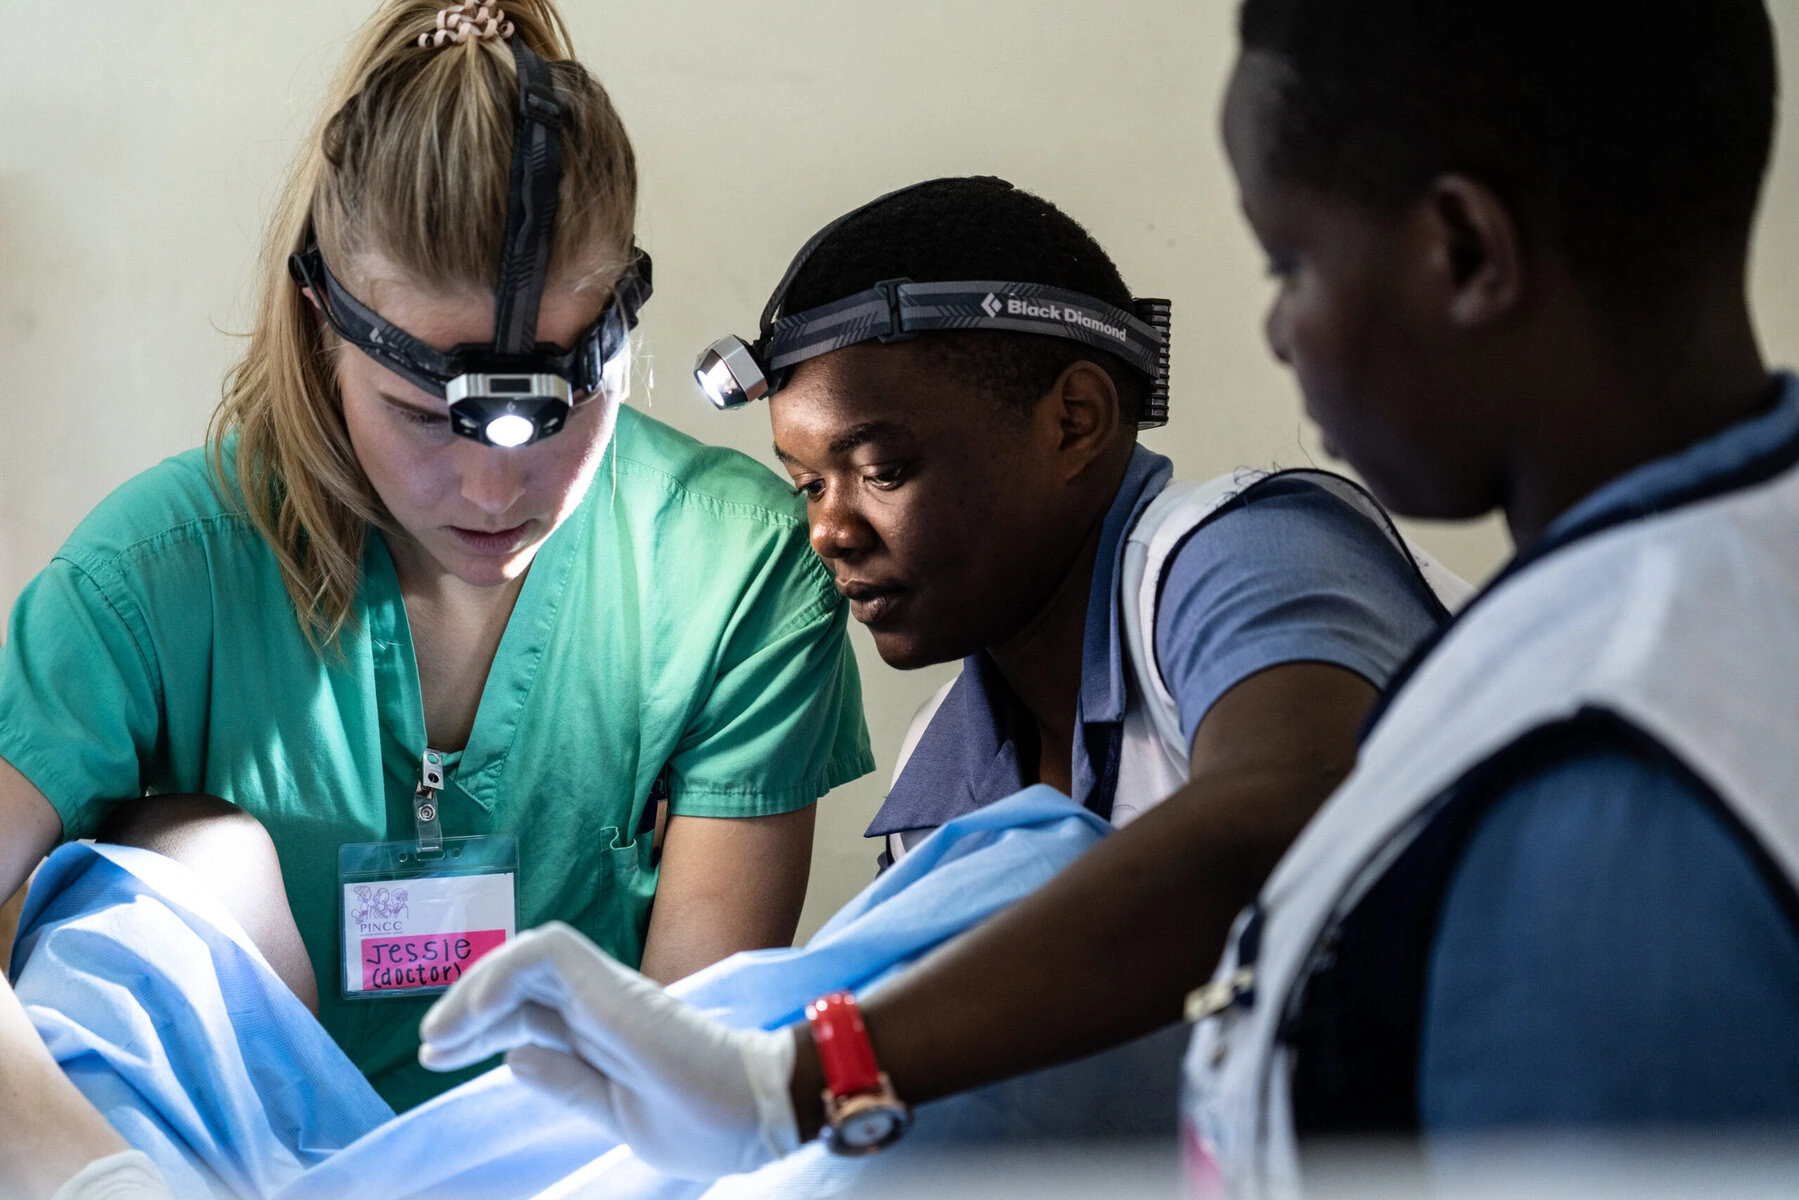 A doctor and volunteers perform an exam on a woman in Kenya.